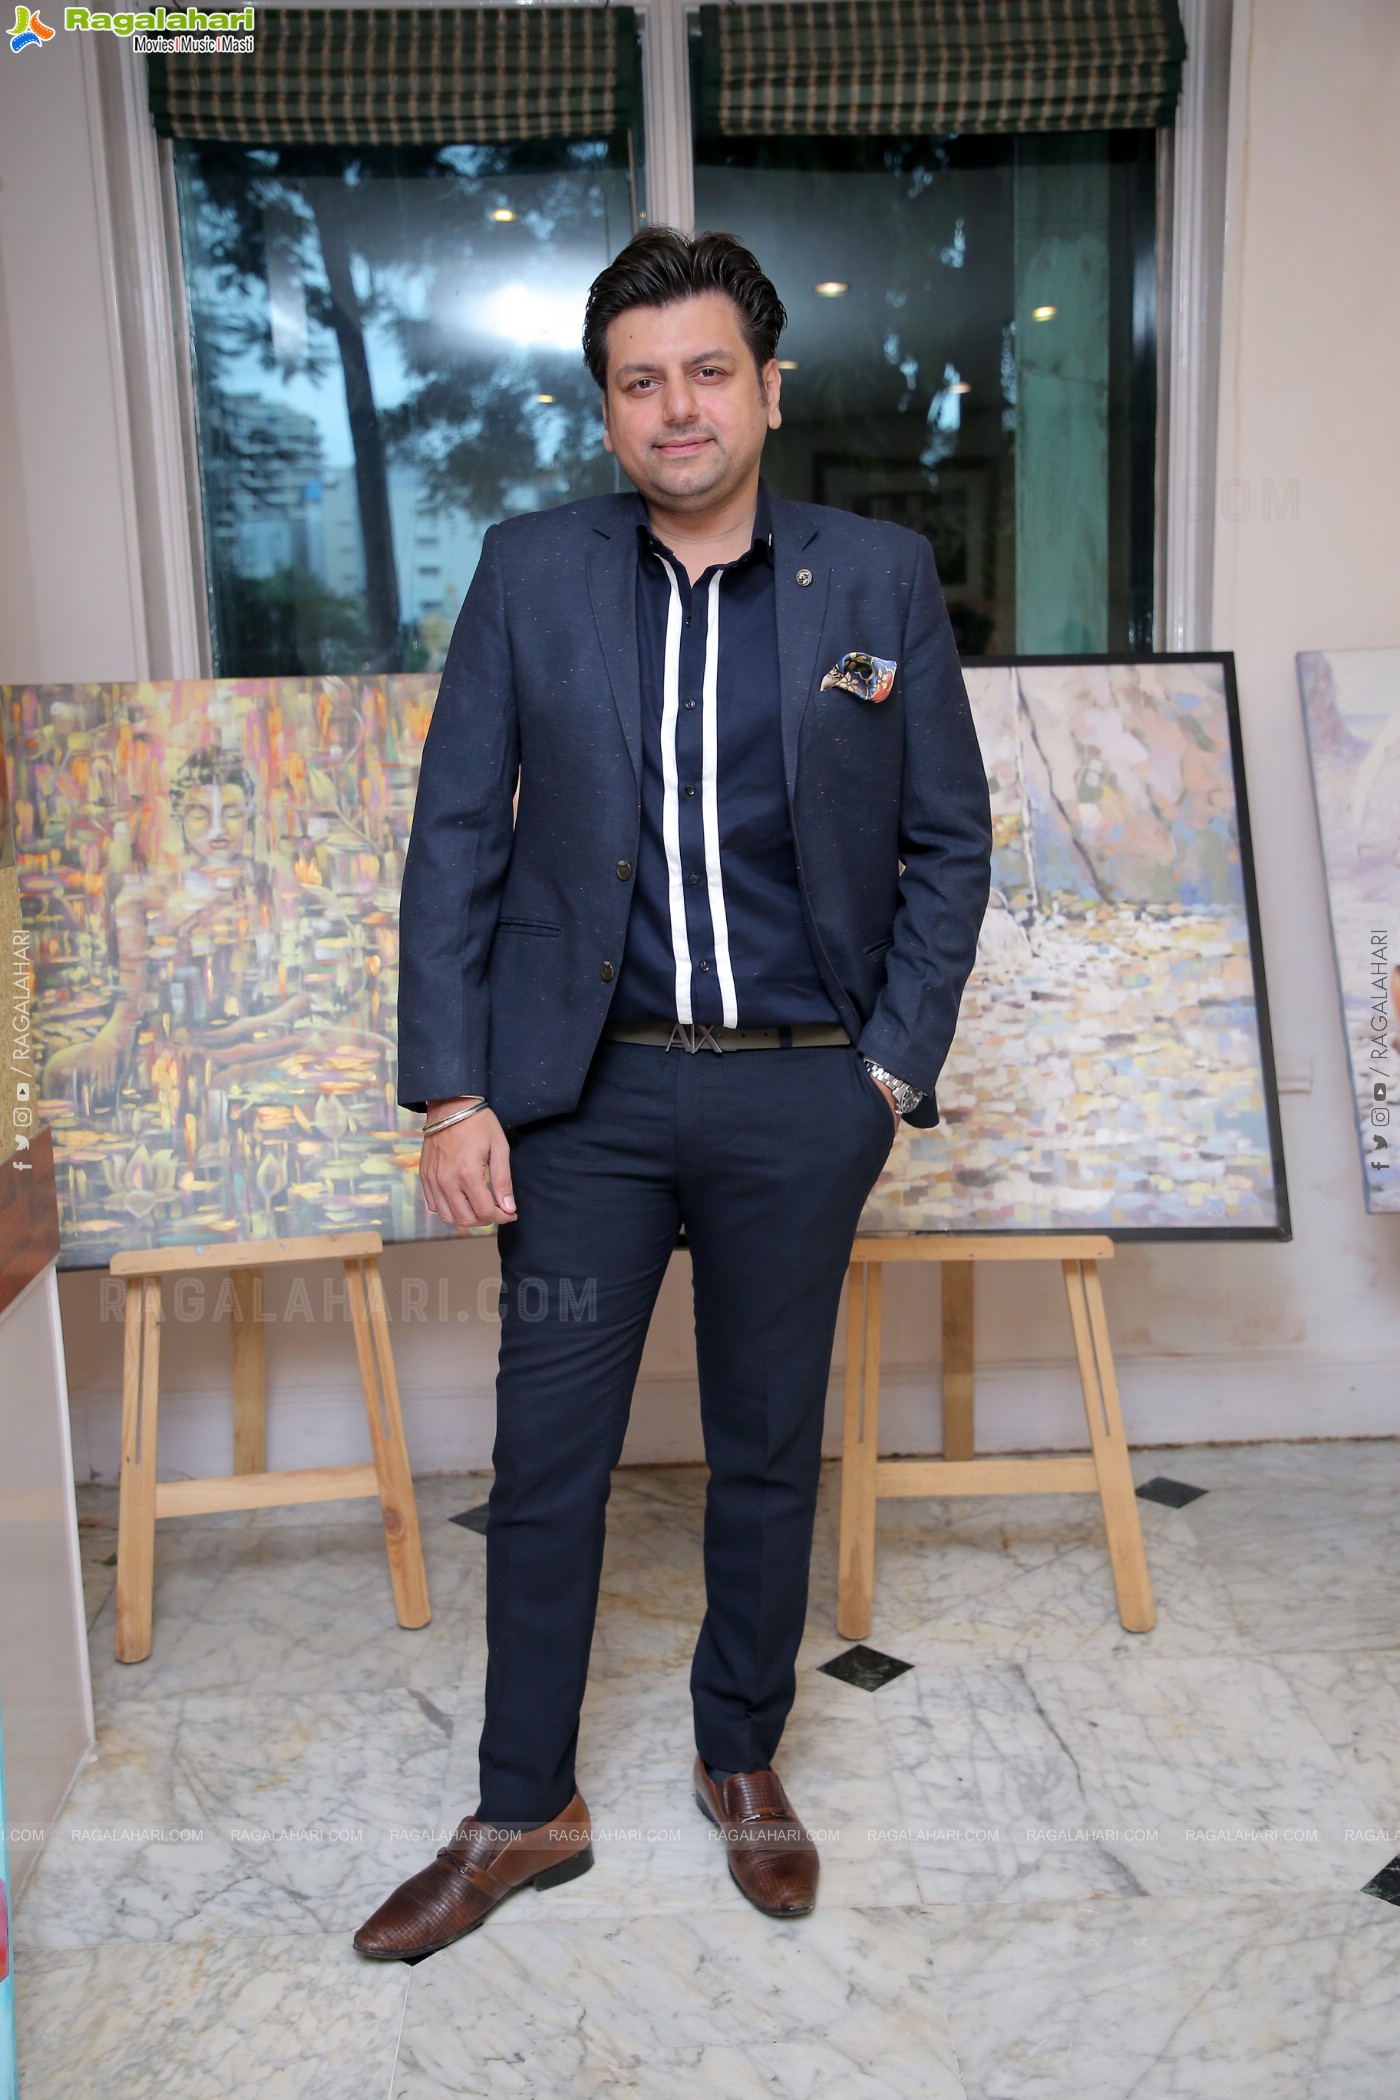 Perseverance Art Exhibition by Visual Art Gallery 